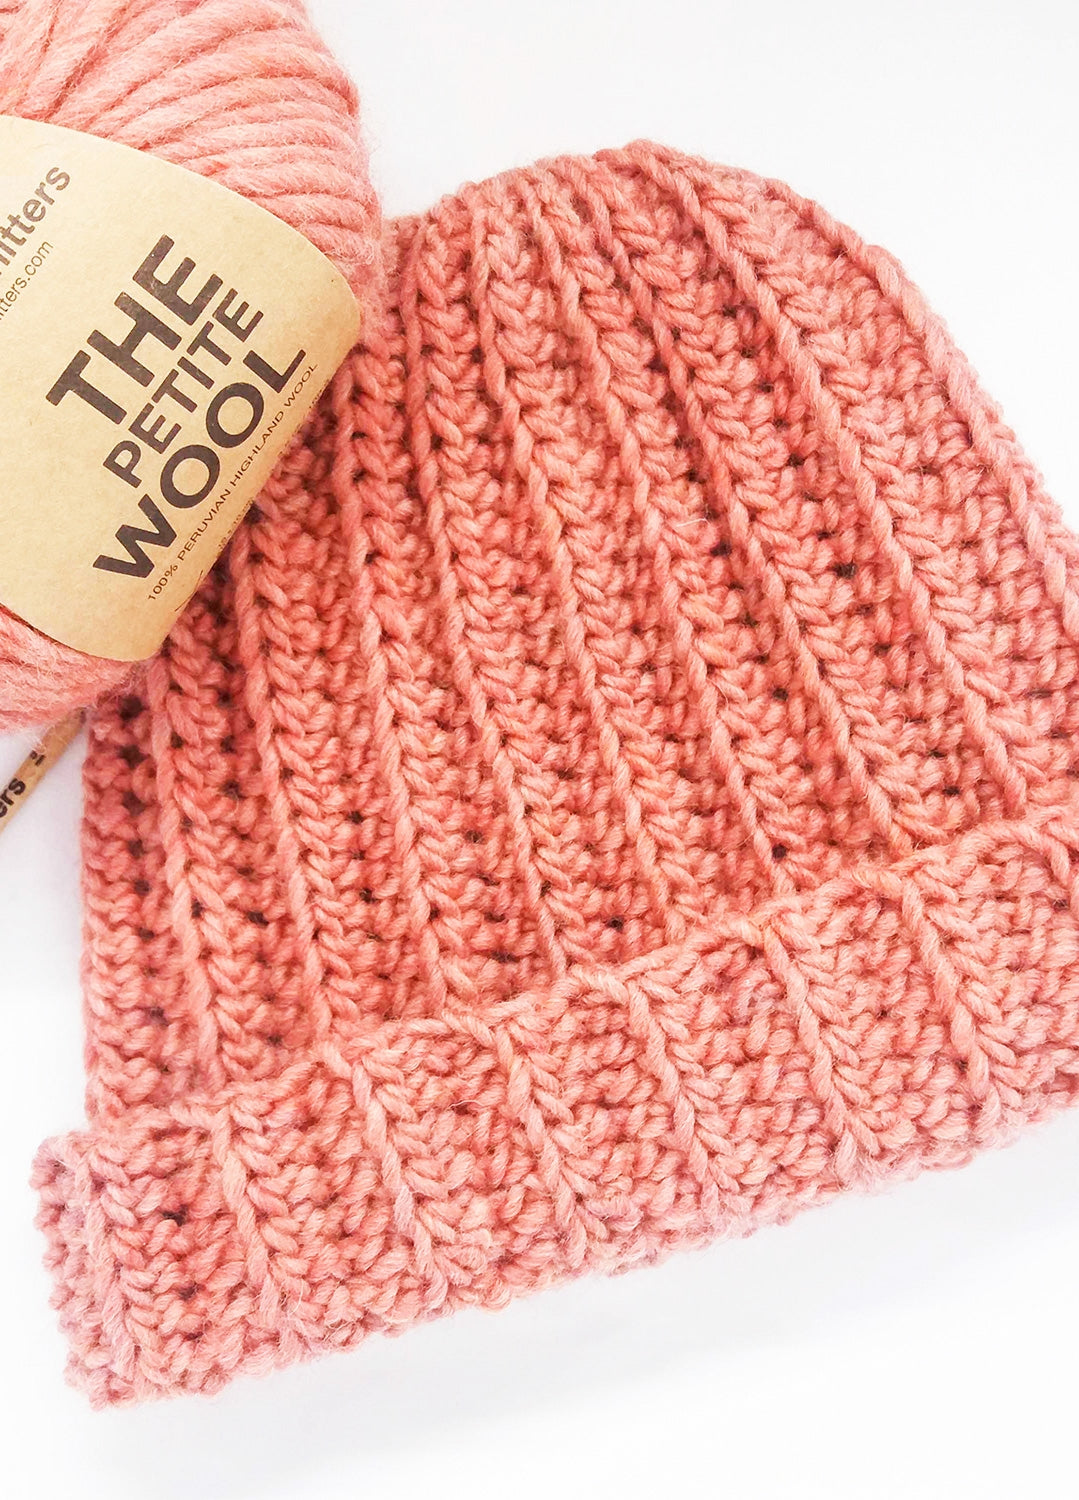 Make it yourself Crochet Kit Super chunky beanie hat kit (adult size)